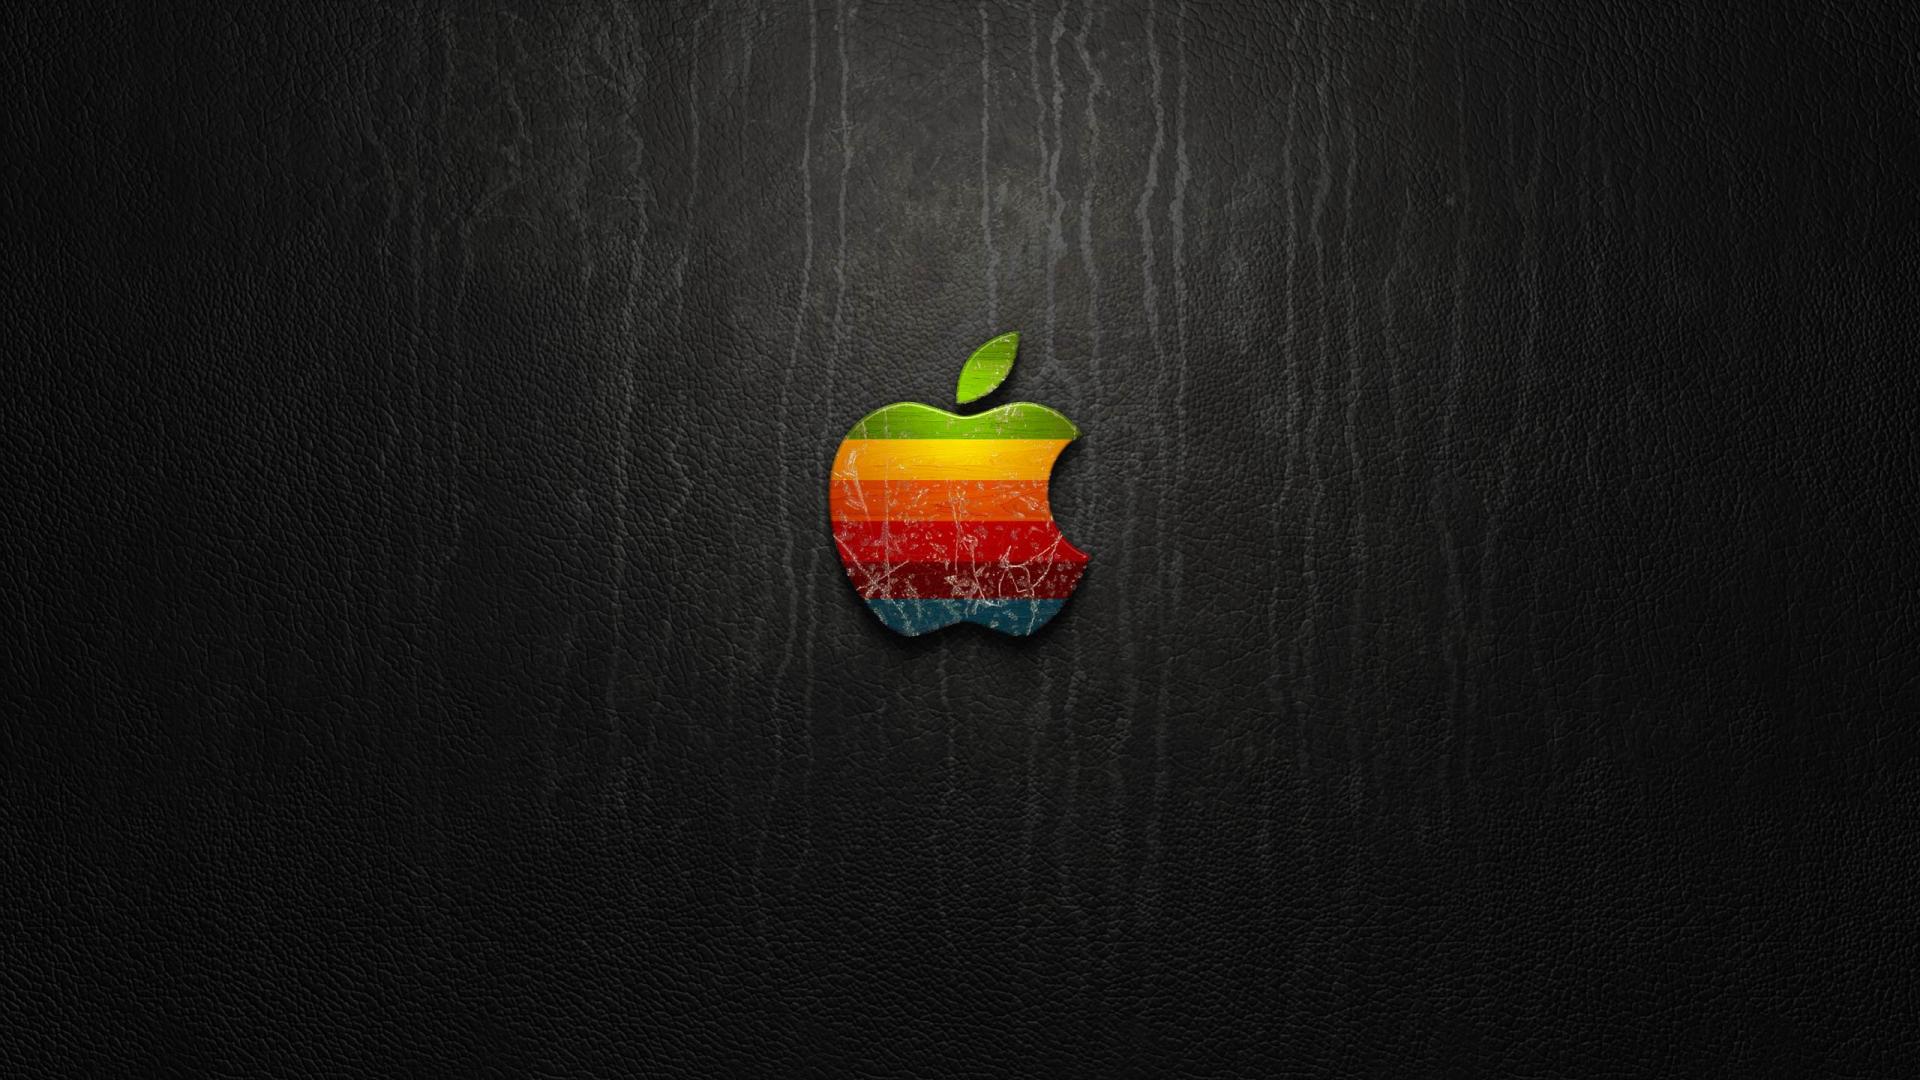 Download Apple For Pc Wallpaper Full HD Backgrounds